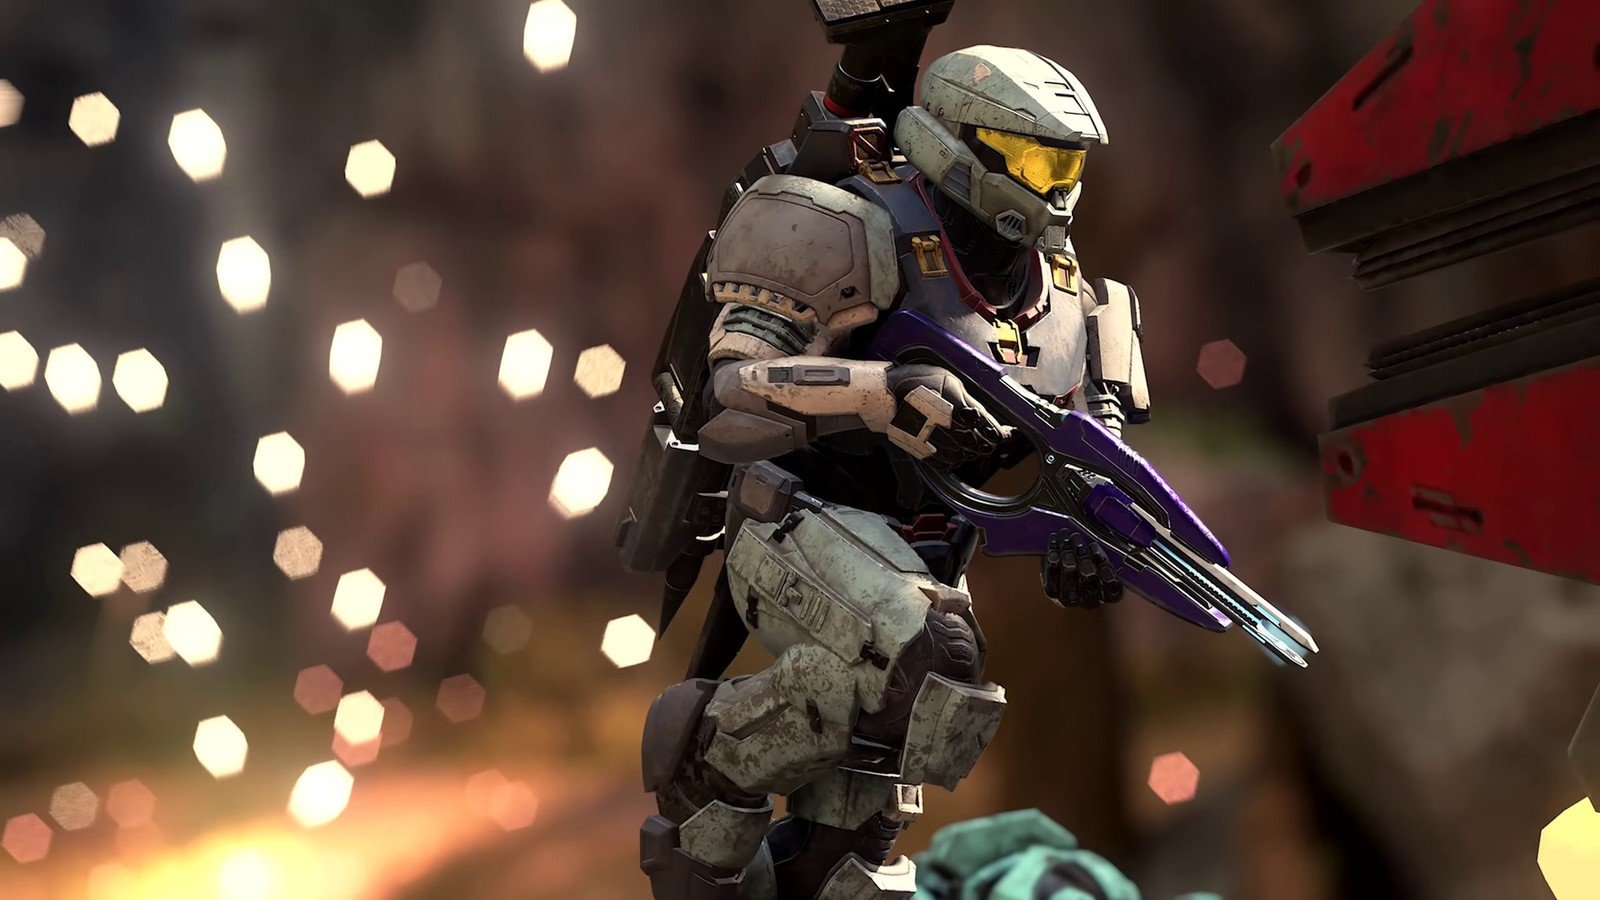 Halo: Master Chief Collection adds cross-platform co-op